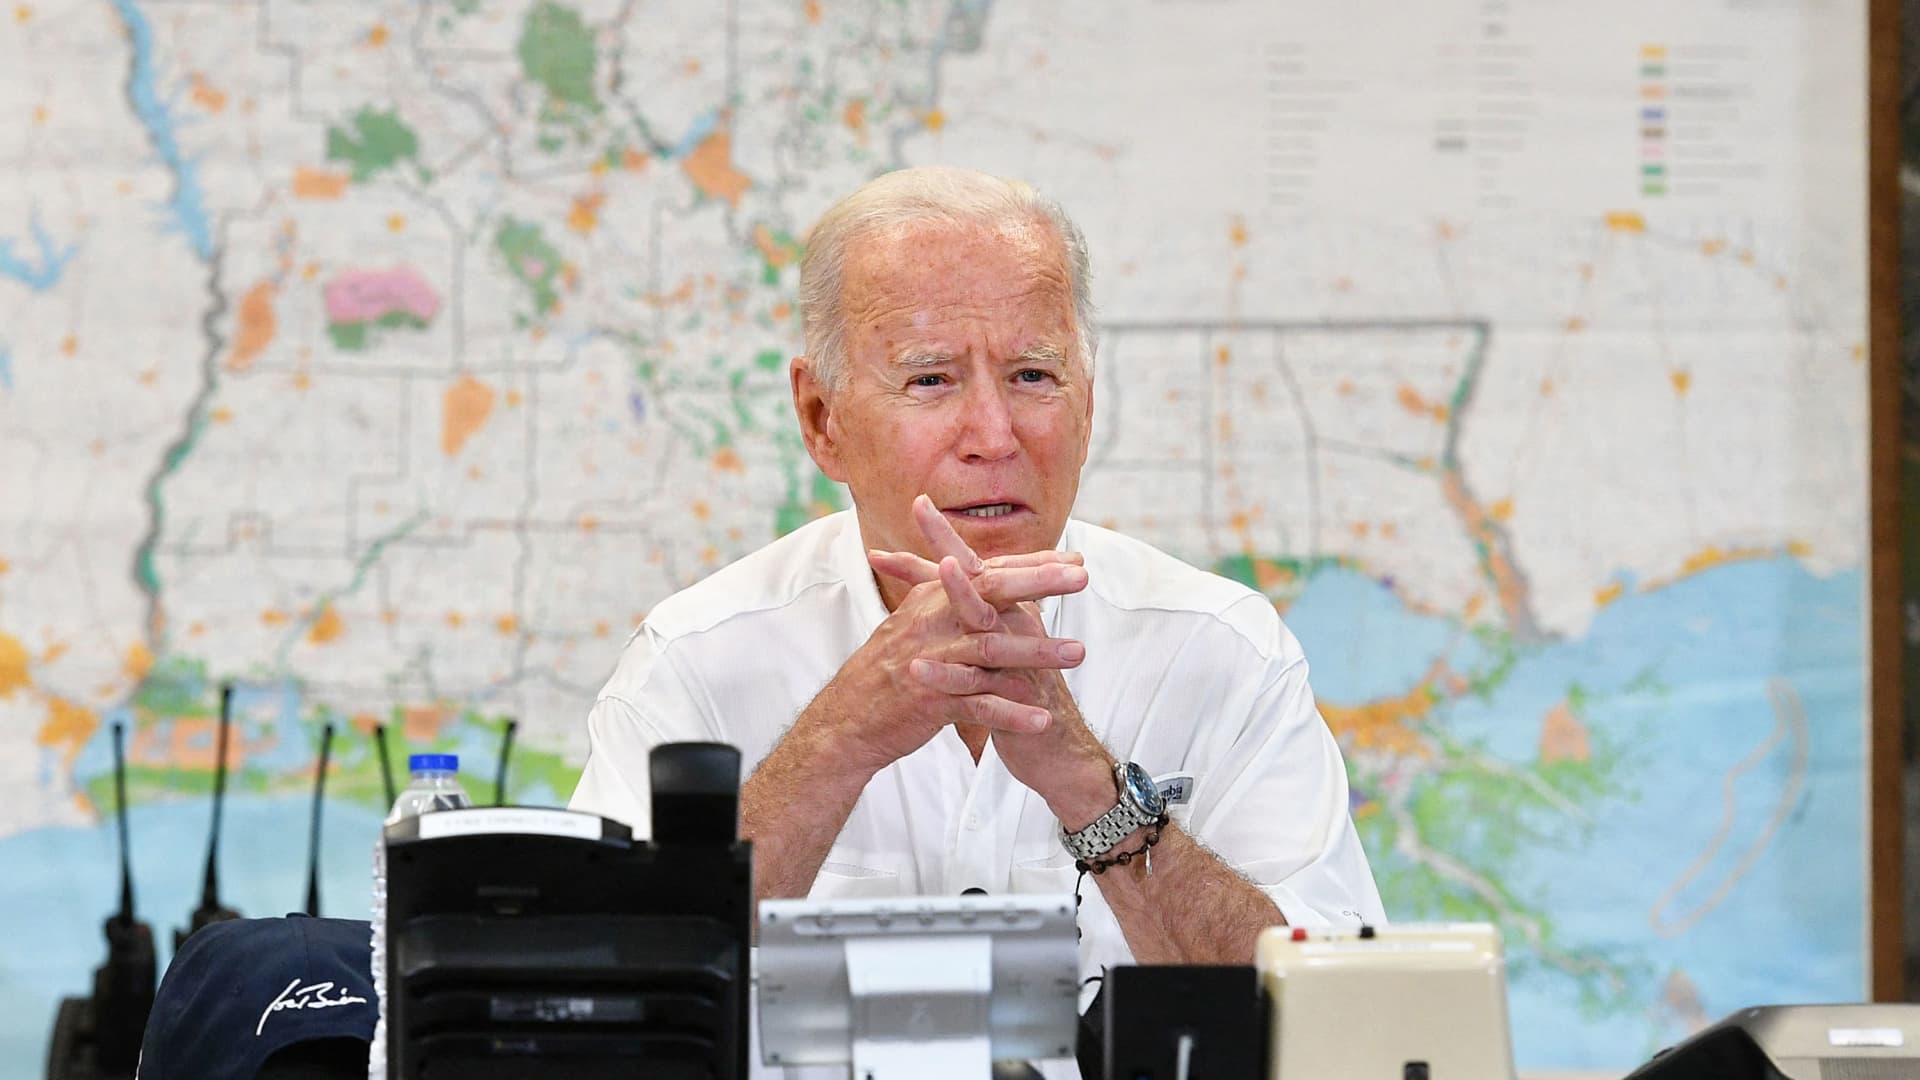 US President Joe Biden takes part in a briefing with local leaders on the impact of Hurricane Ida at the St. John Parish's Emergency Operations Center in LaPlace, Louisiana on September 3, 2021.